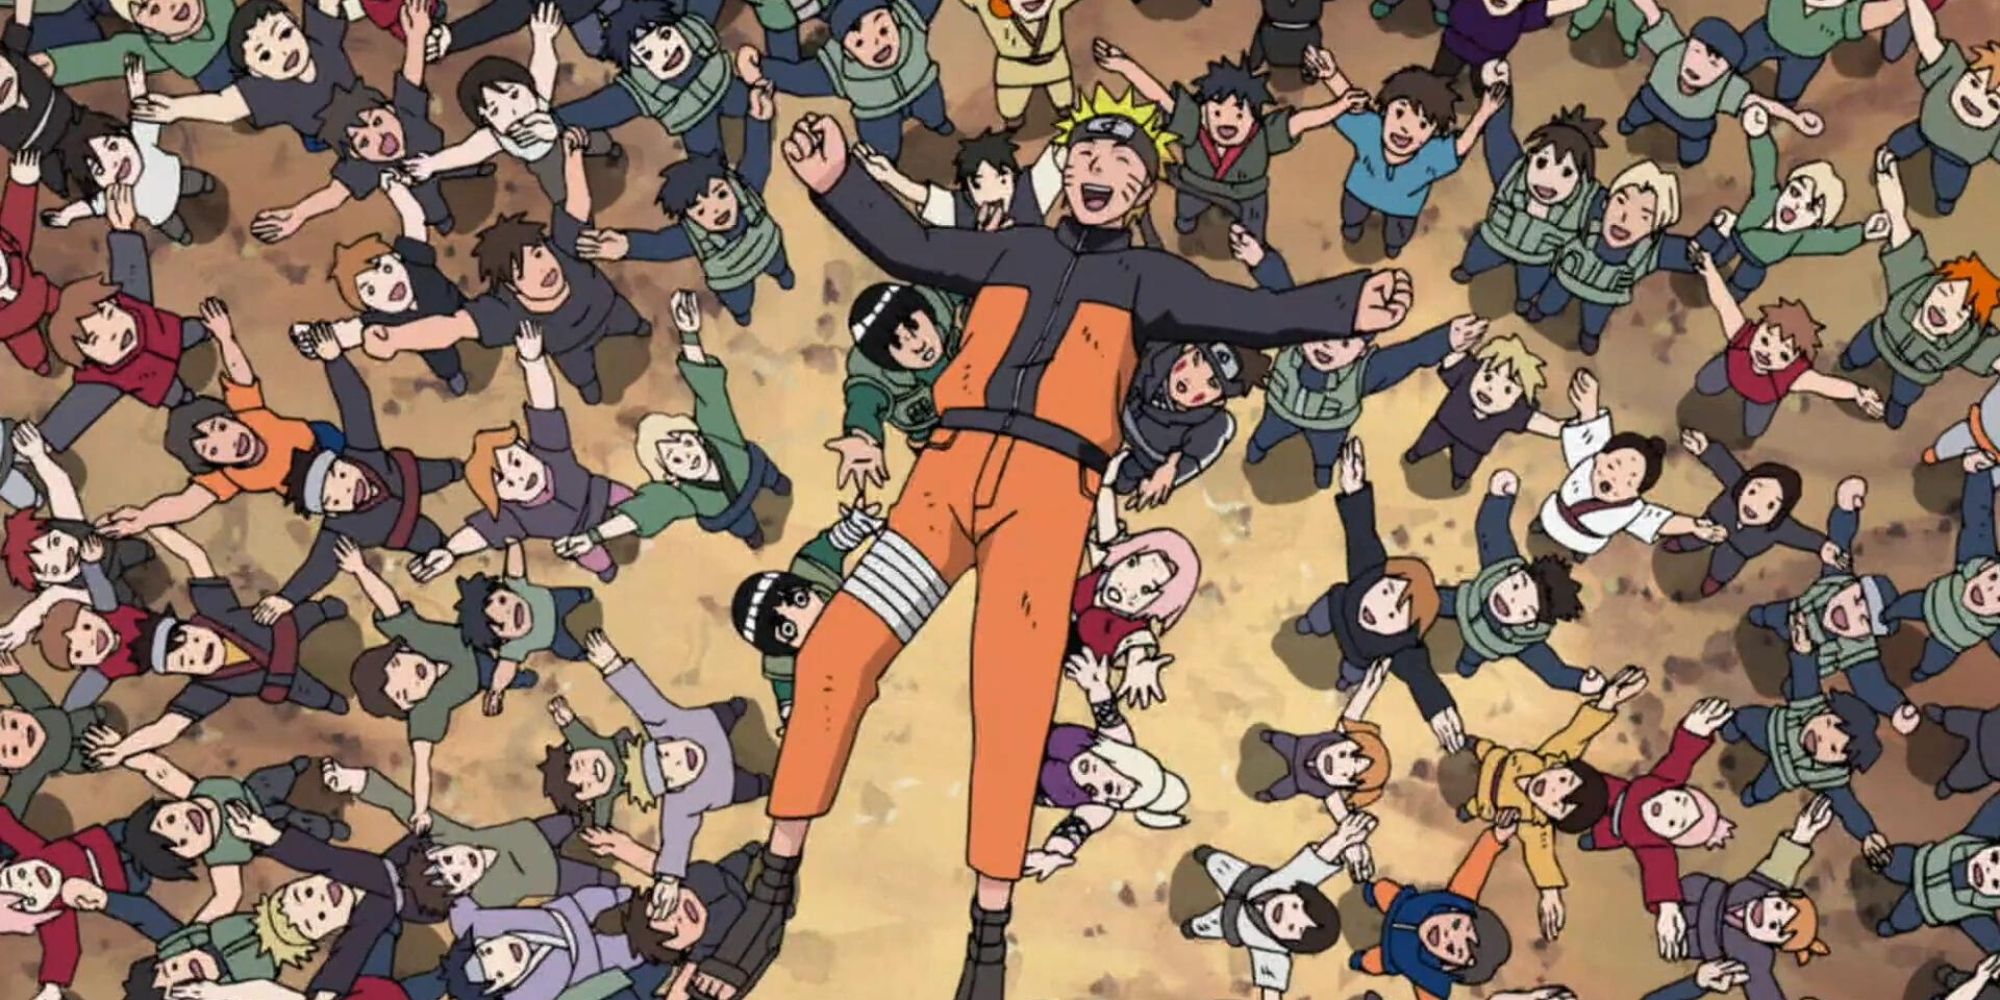 Naruto and villagers in Naruto